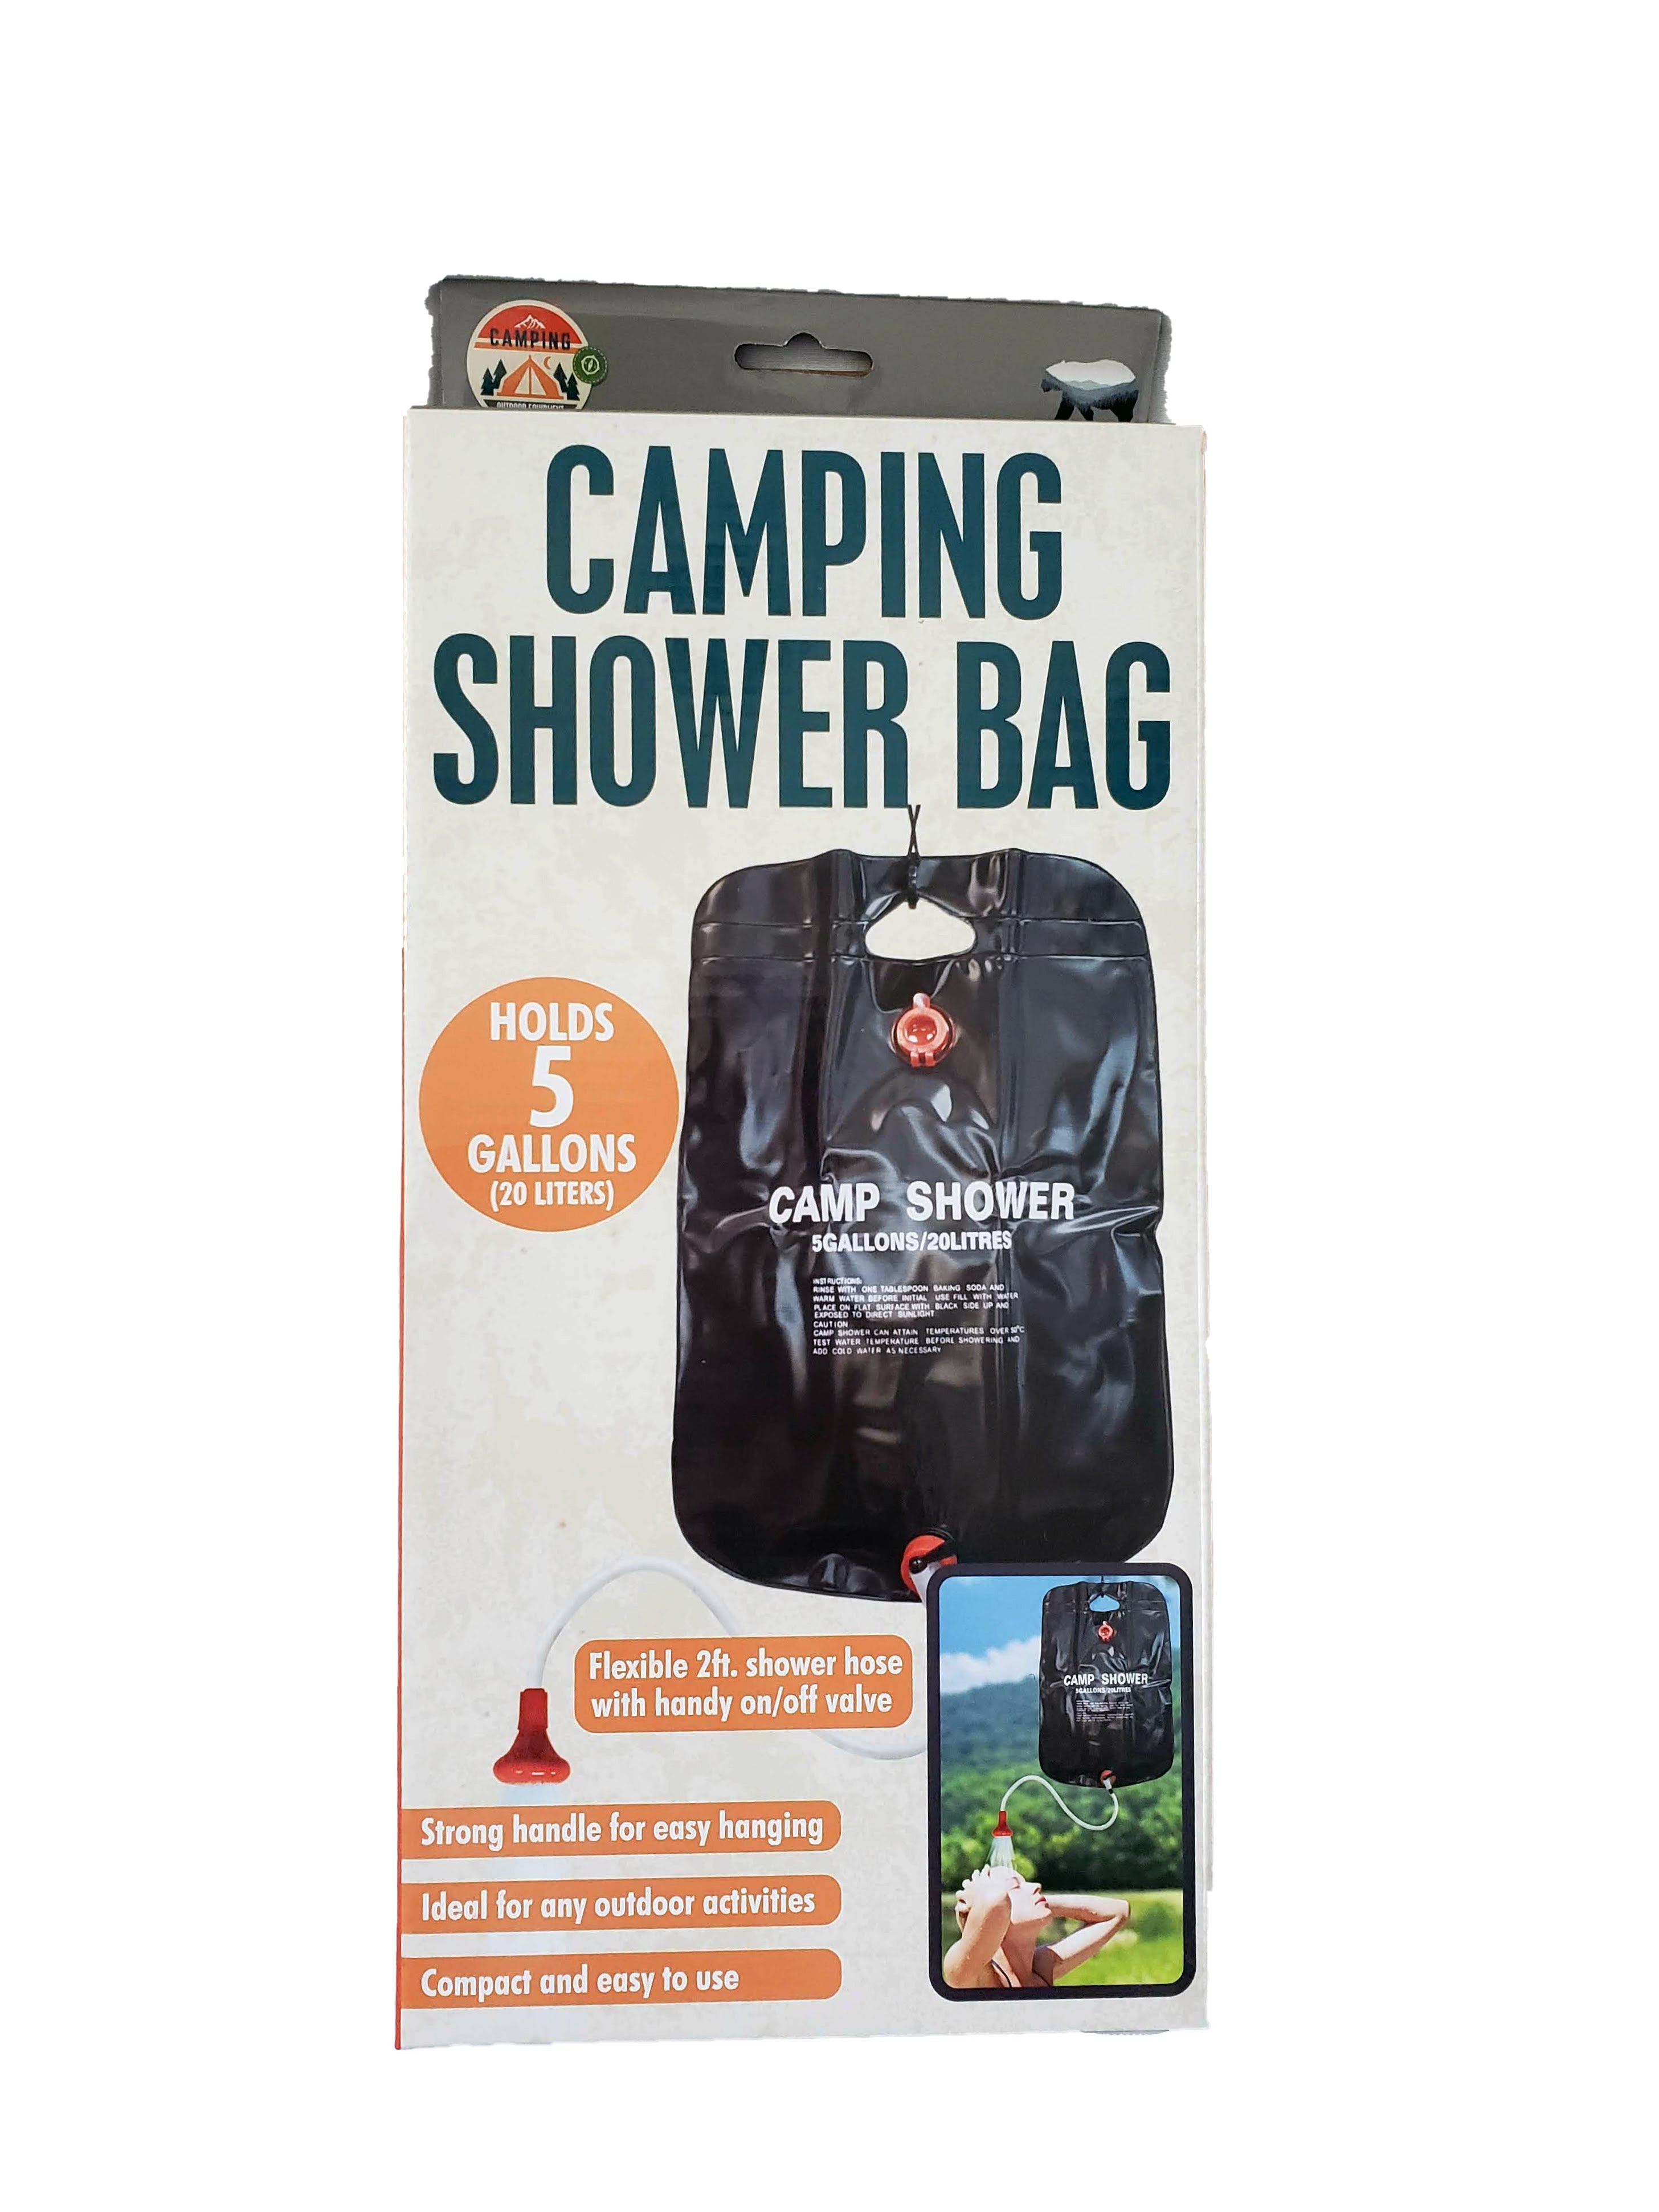 Pacific Rayne | Portable Camping Shower Bag - 5 Gallon Capacity, , Pacific Rayne, Defiance Outdoor Gear Co.